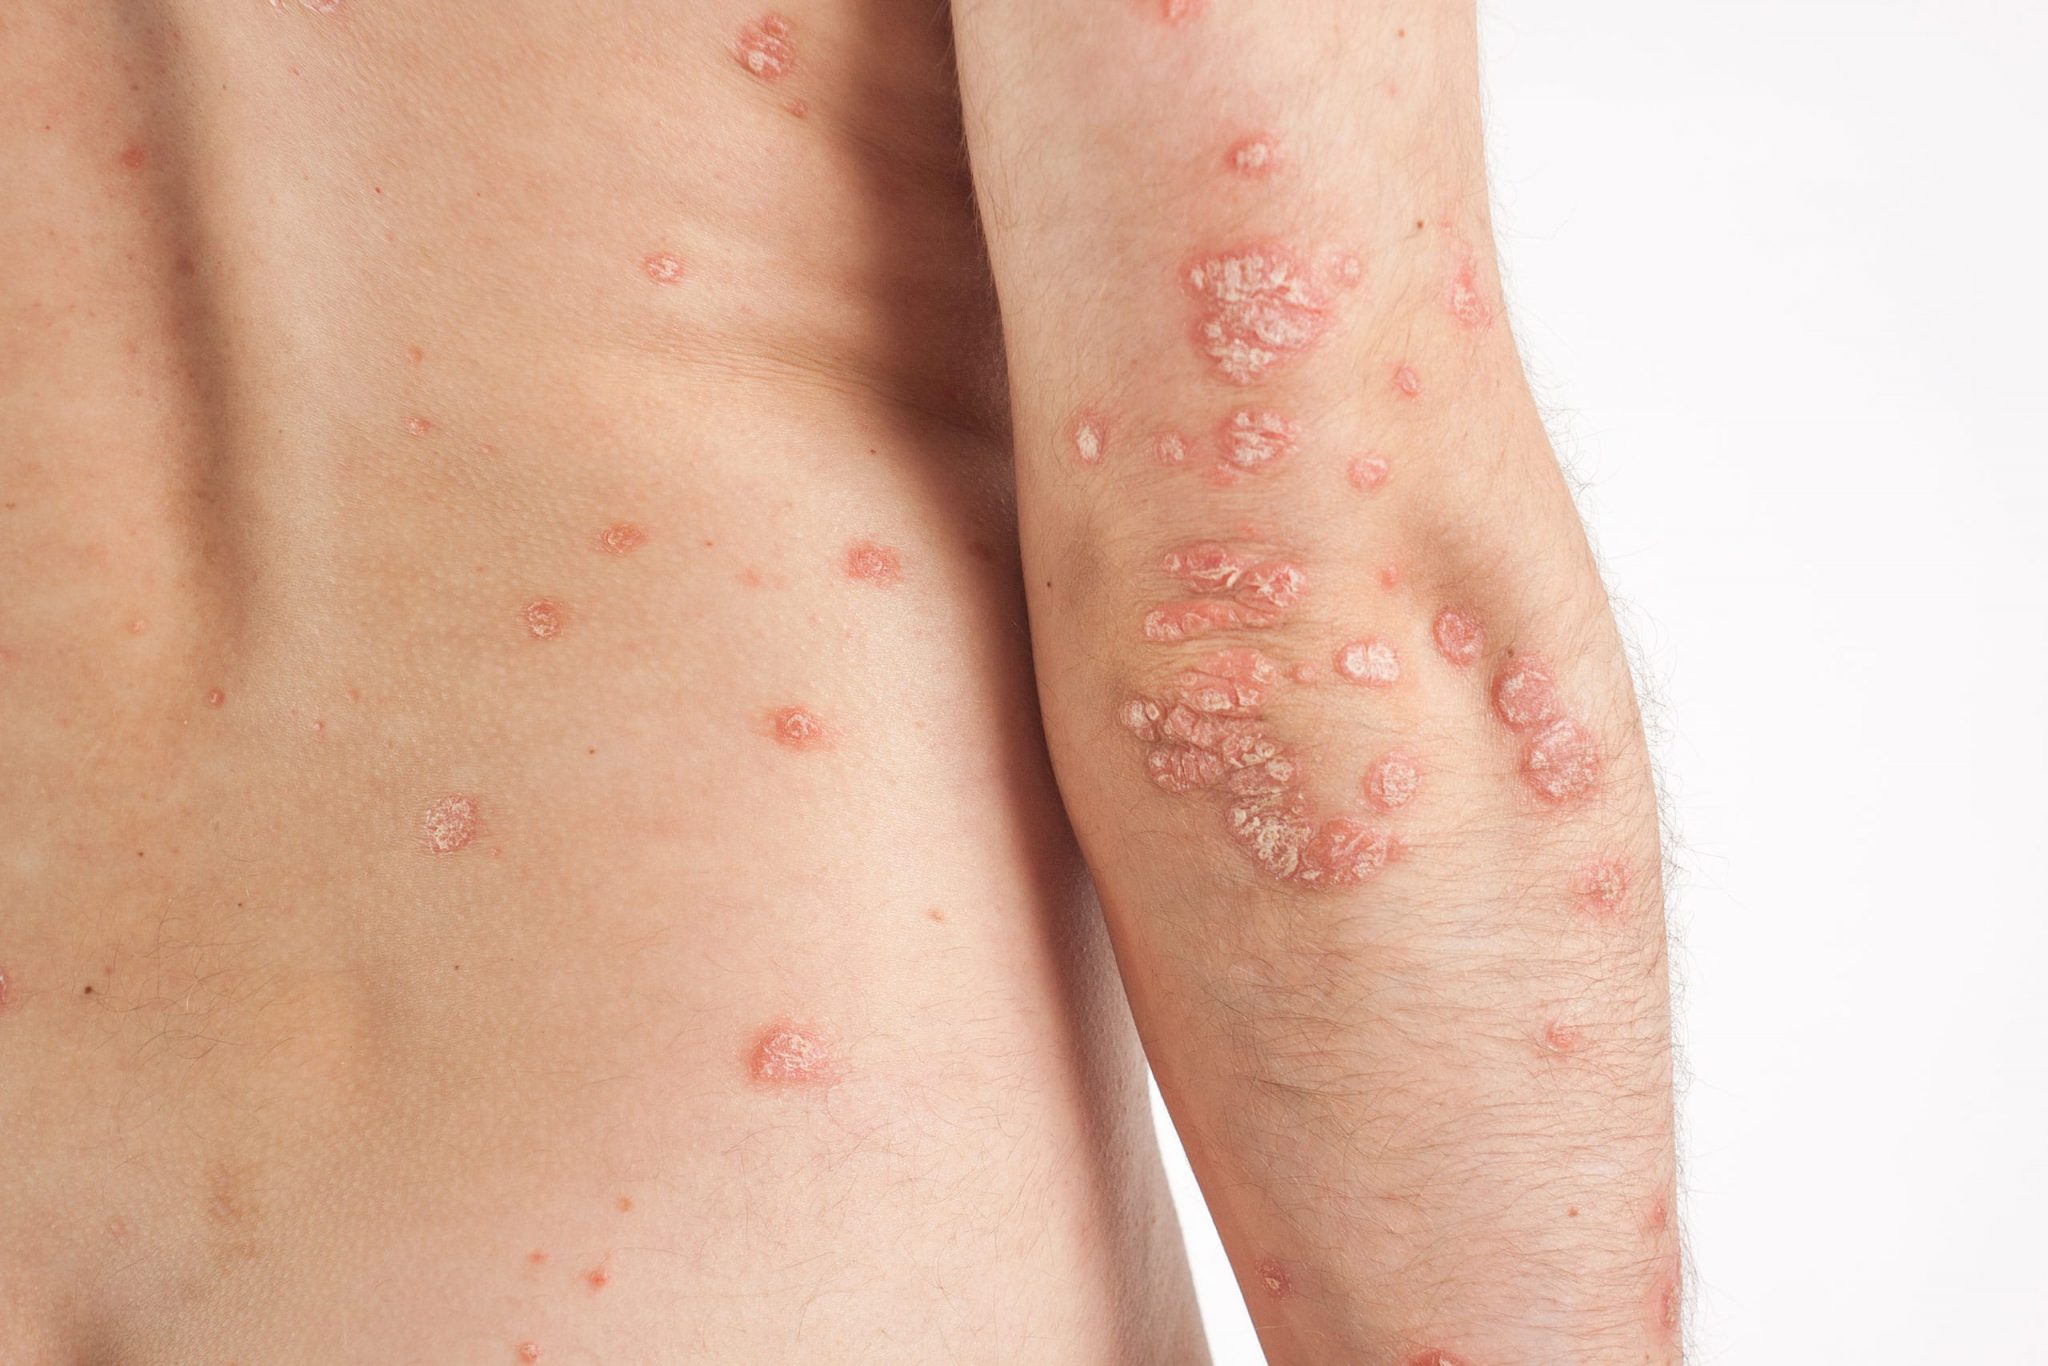 dating someone with psoriasis